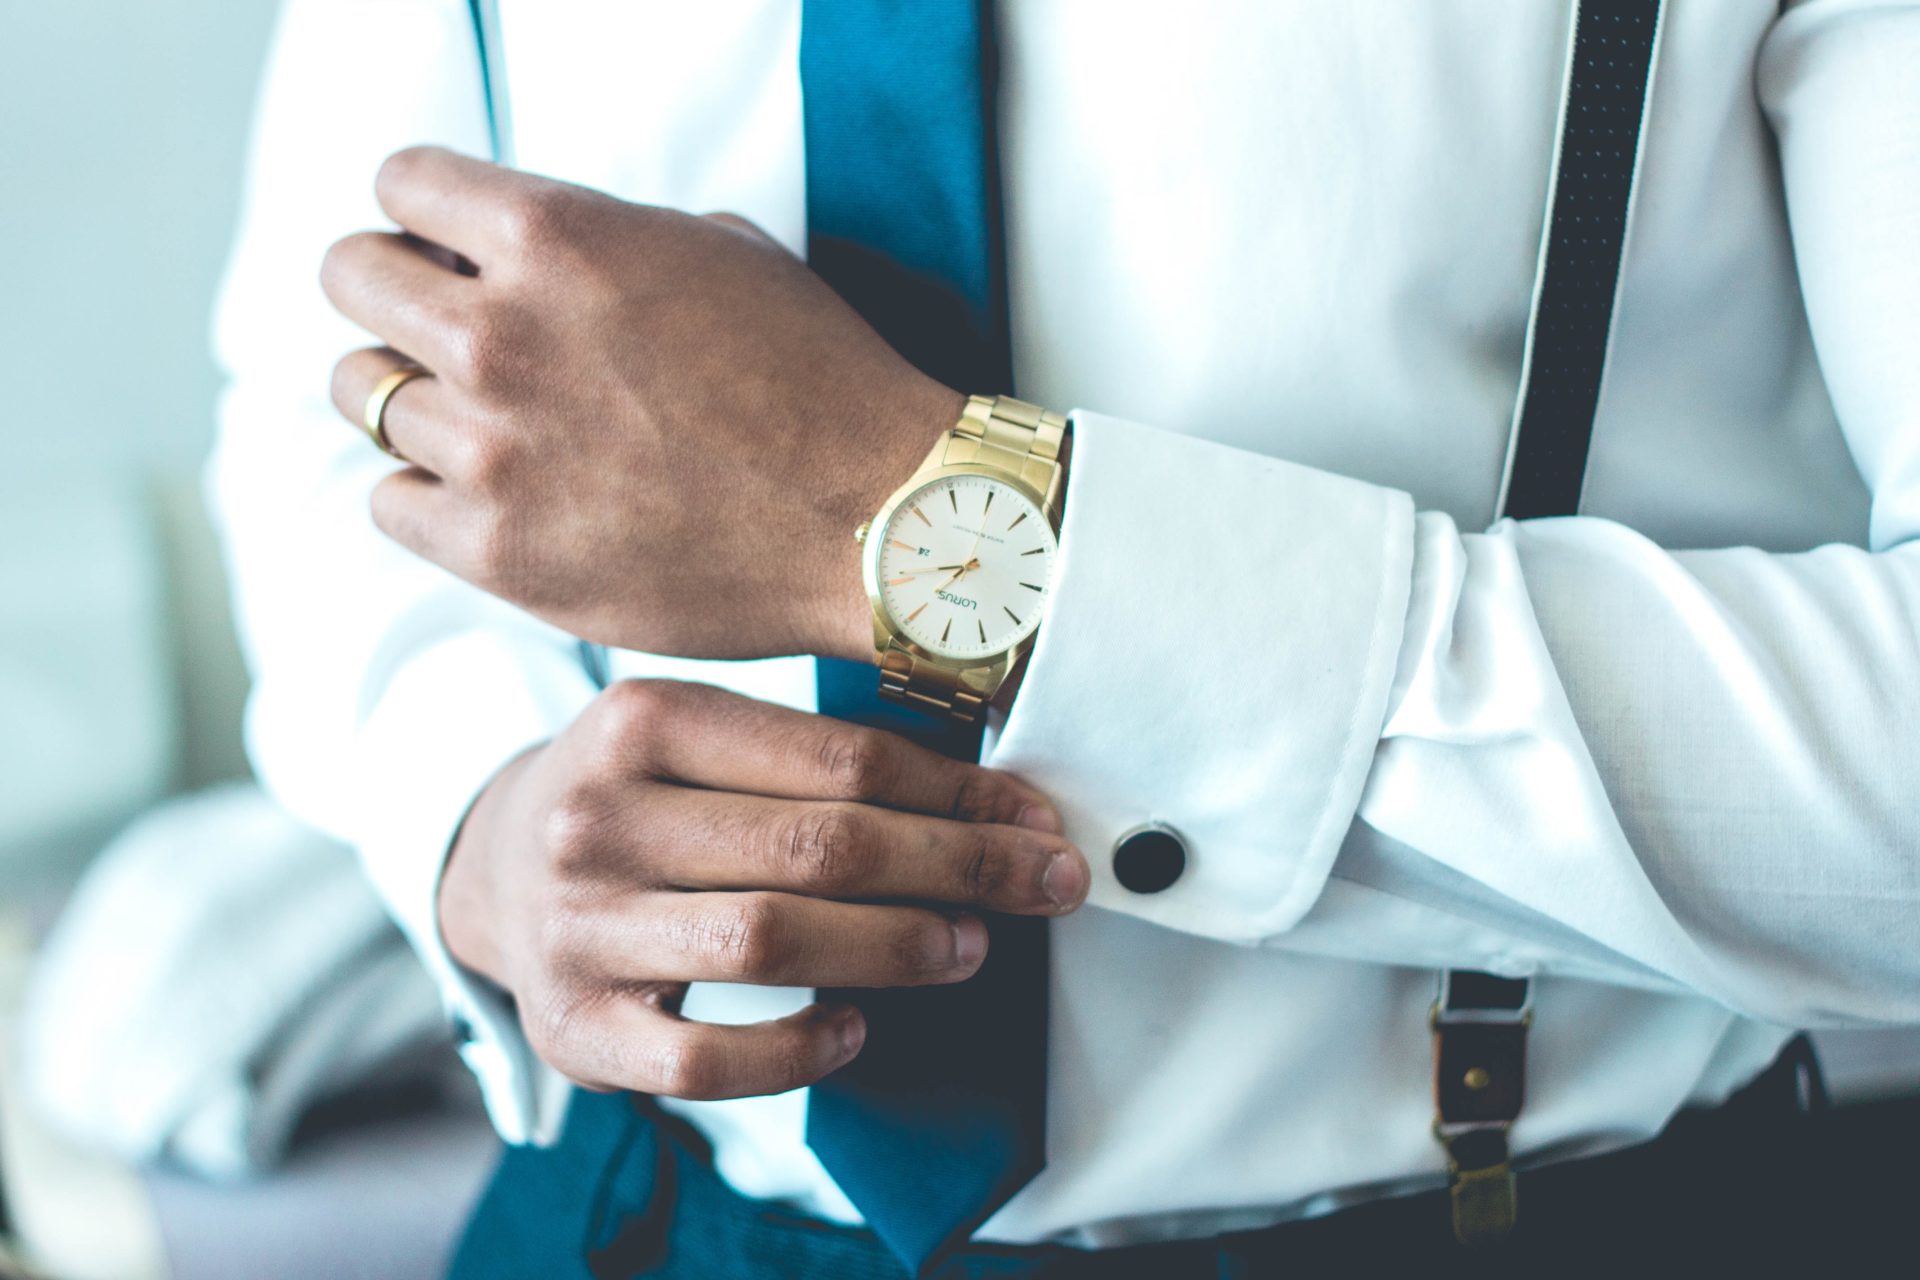 Man in shirt and tie with expensive watch